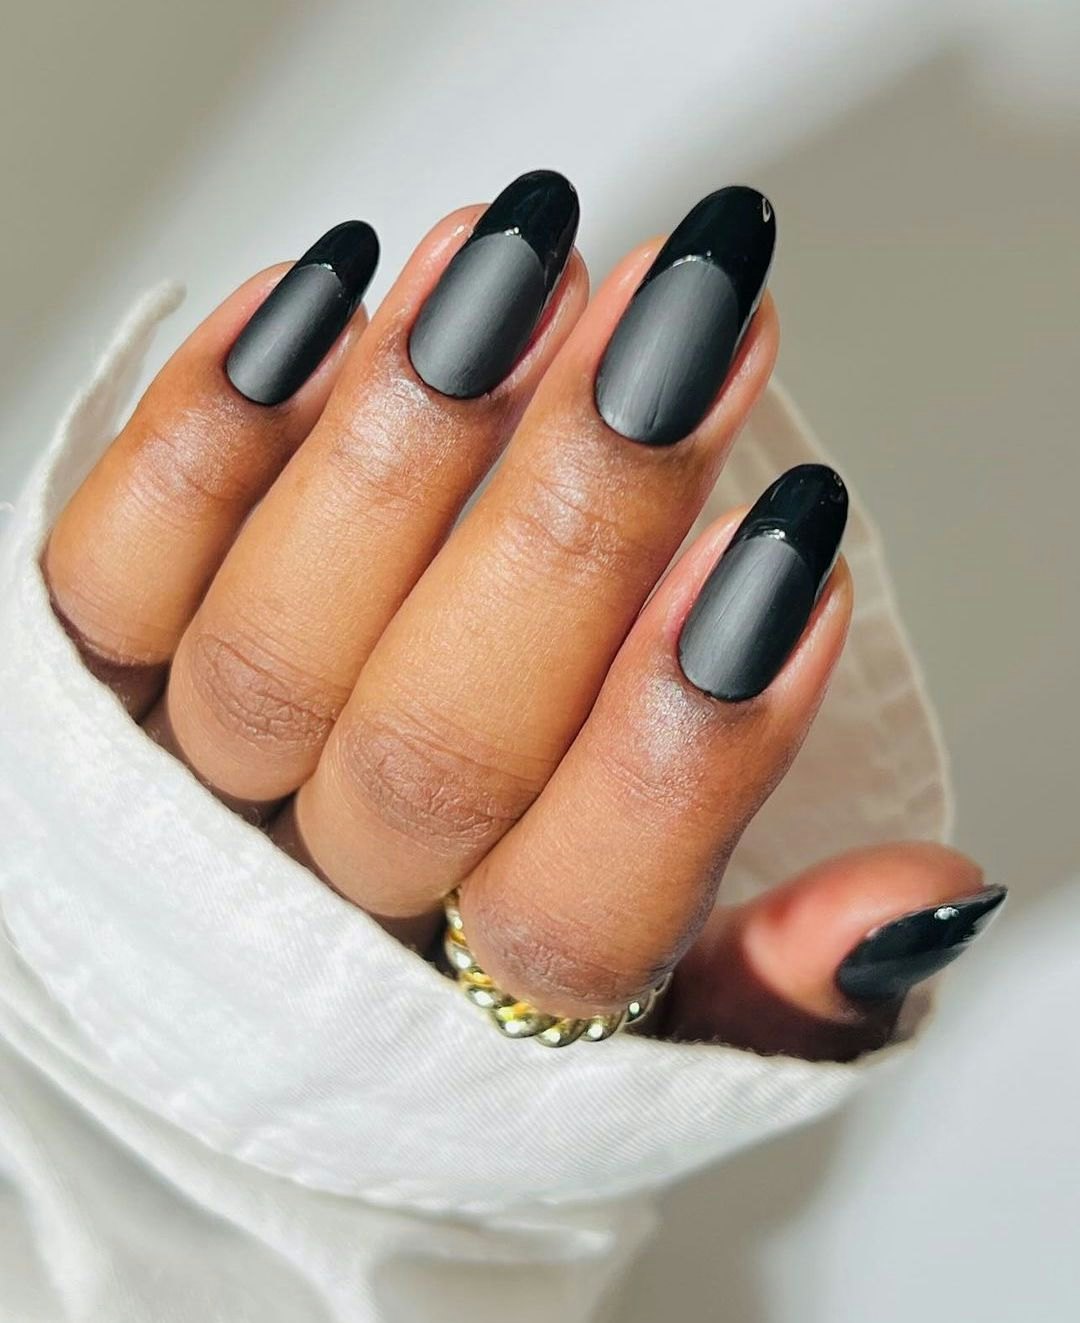 Nails and More Salon - Deep black oval French nails with gems by Anica.  💖Follow our page for daily nail designs and surprise promotions! ❗️ Accept  walking-ins EVERYDAY (last walk-in is 30mins